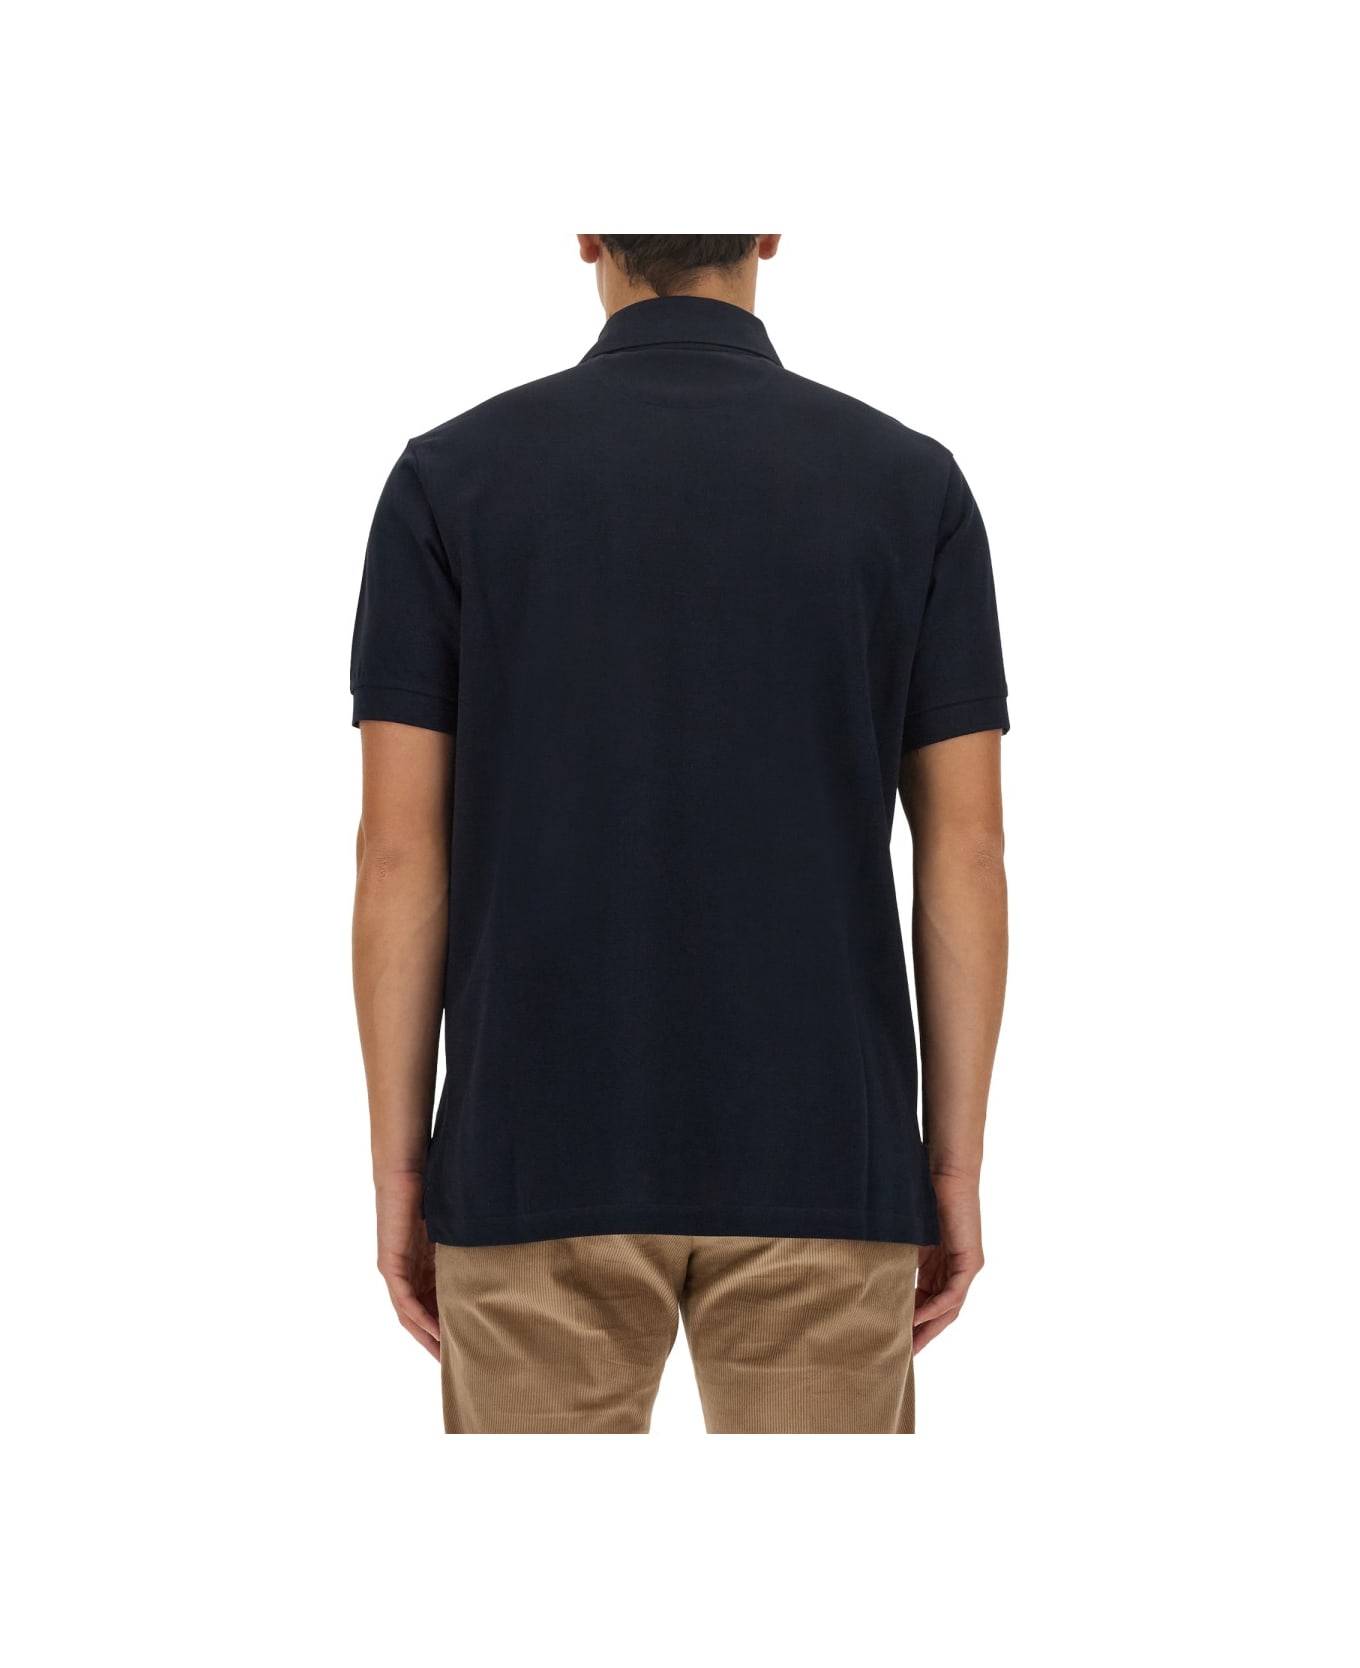 Paul Smith Regular Fit Polo Shirt - BLUE ポロシャツ